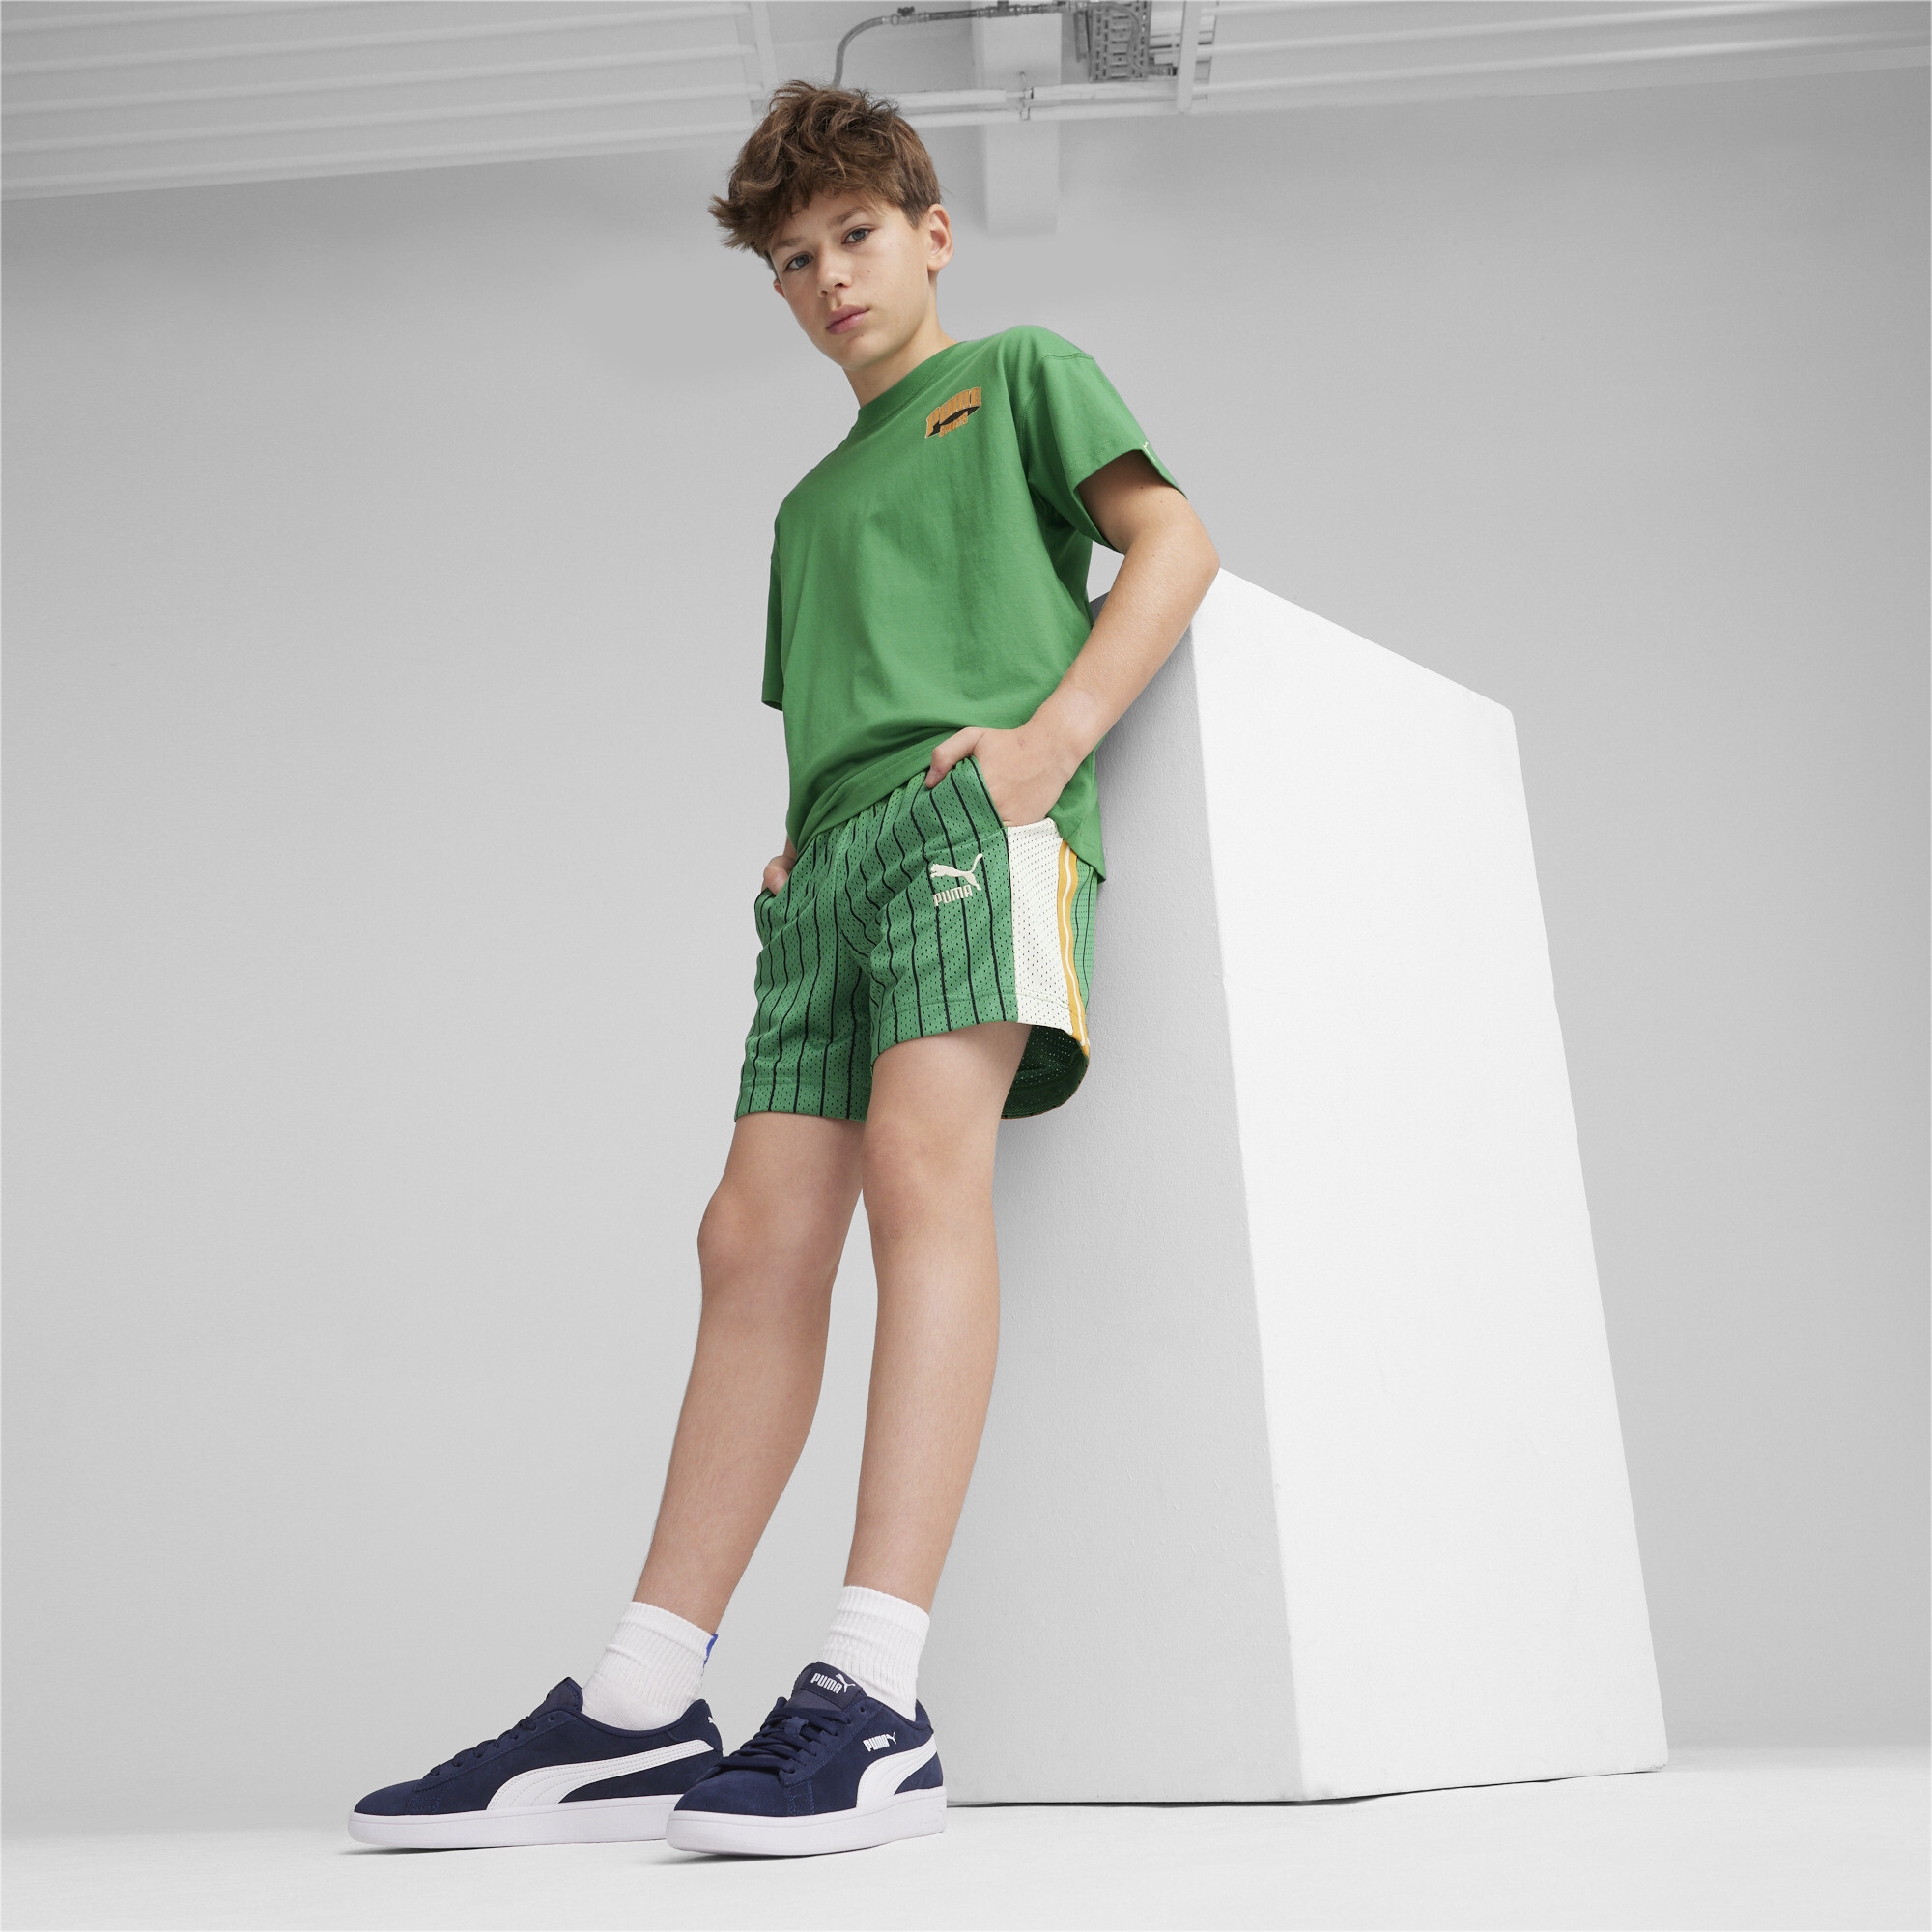 PUMA For The Fanbase Basketball Shorts In Green, Size 7-8 Youth